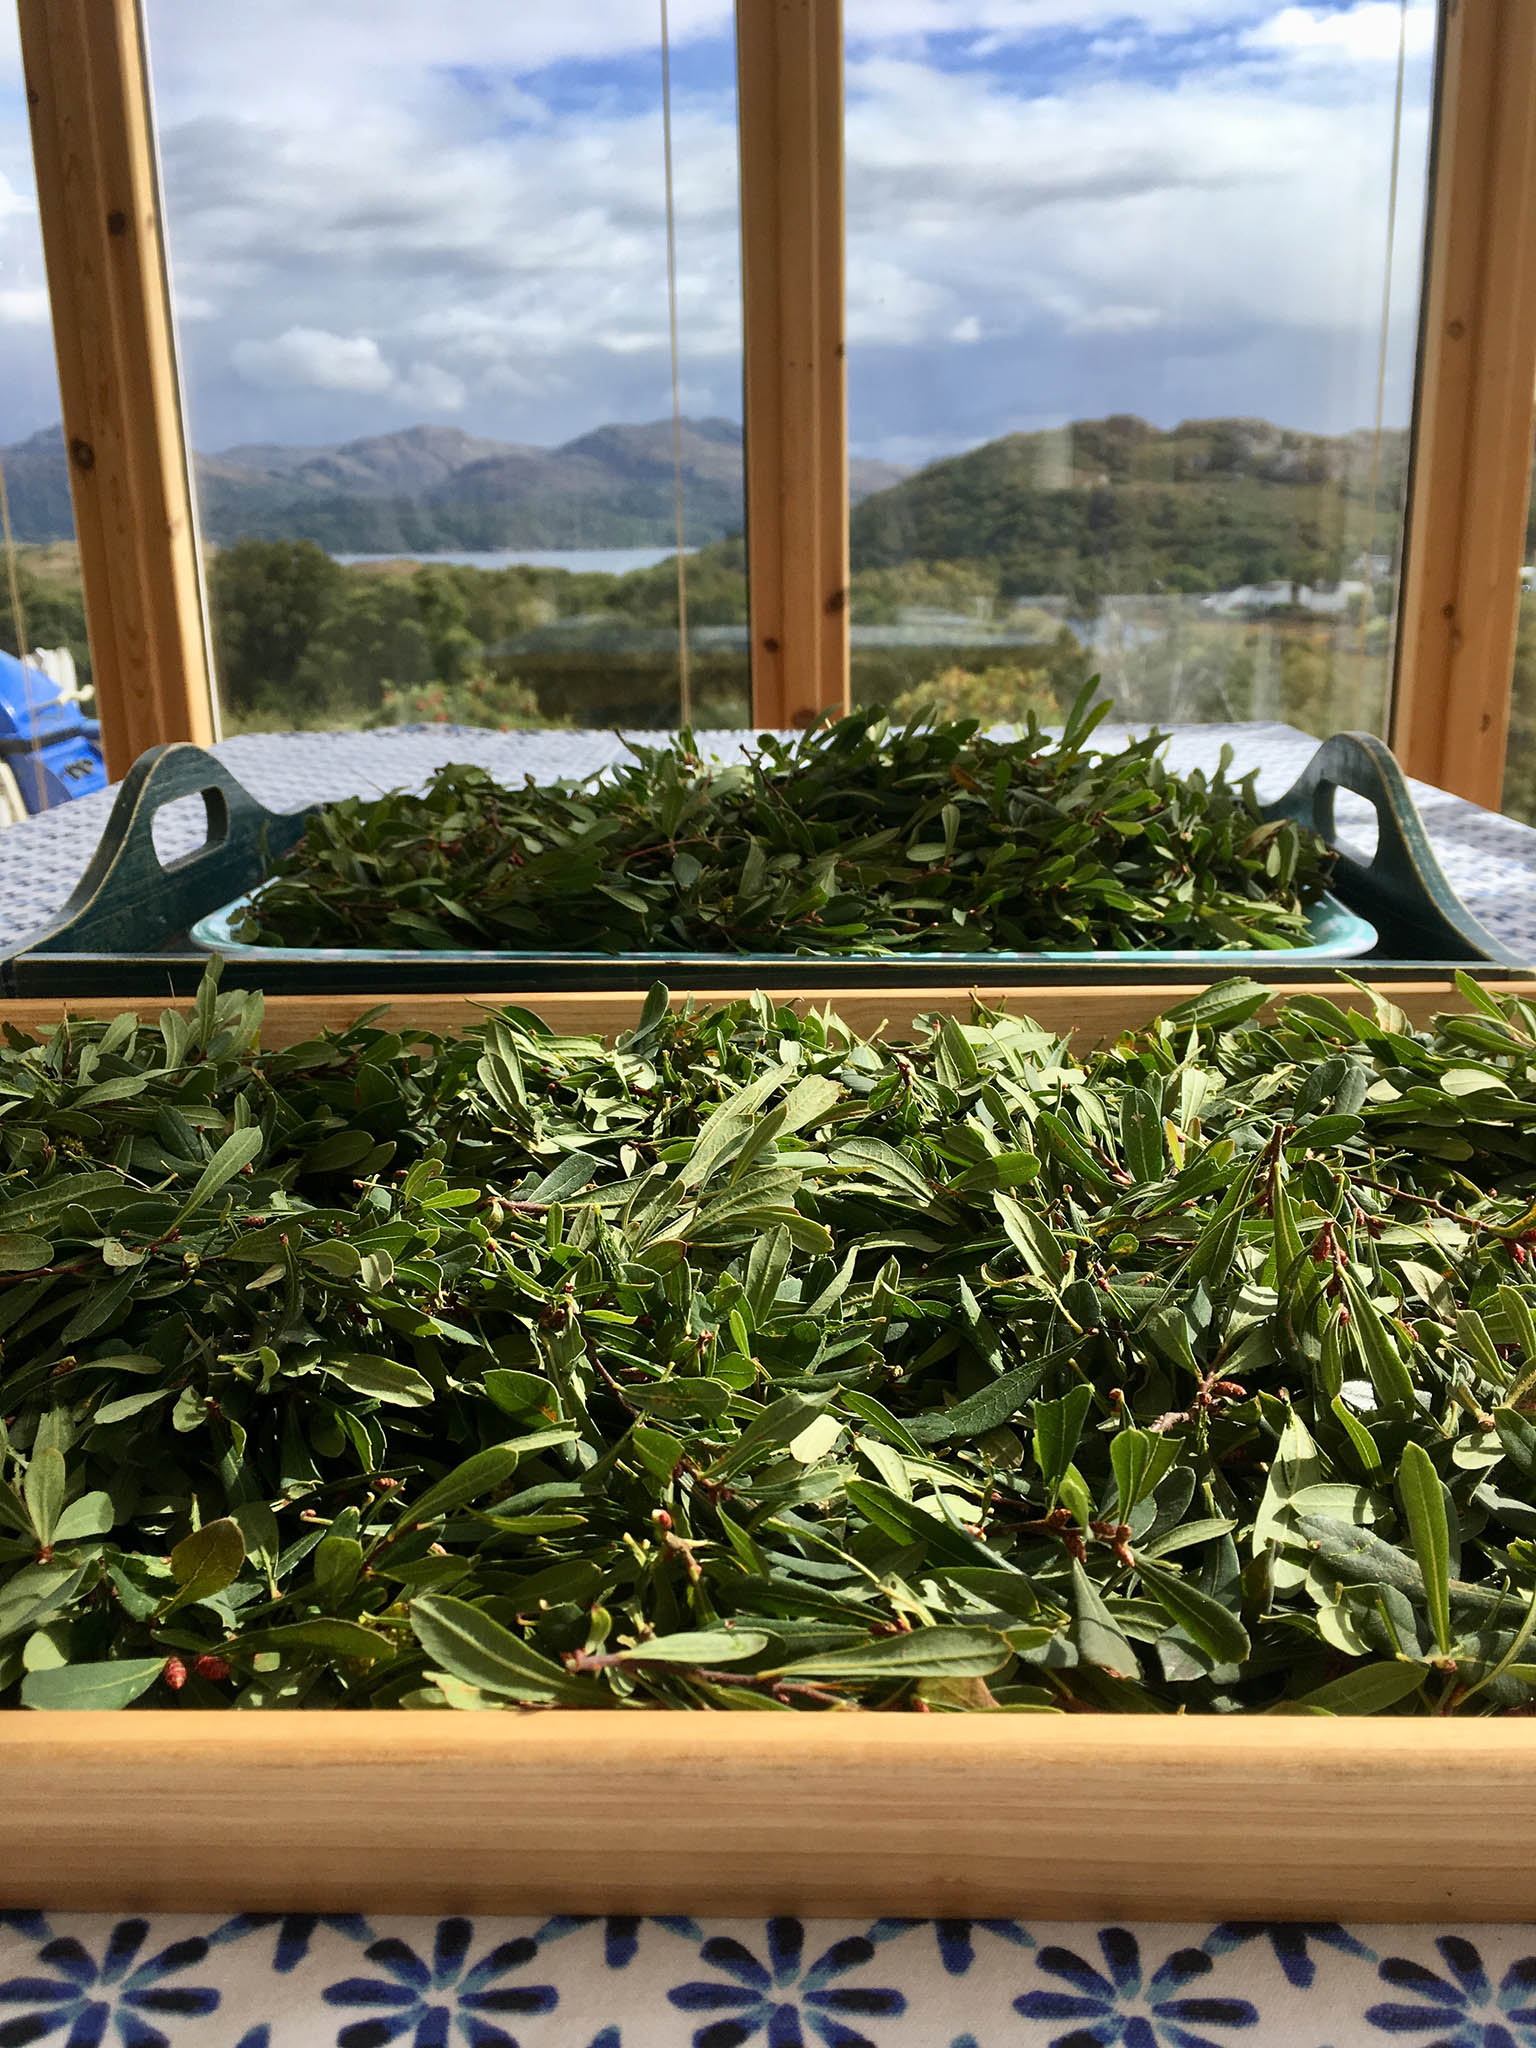 Drying hand-picked wild local myrtle in the house to use as a botanical